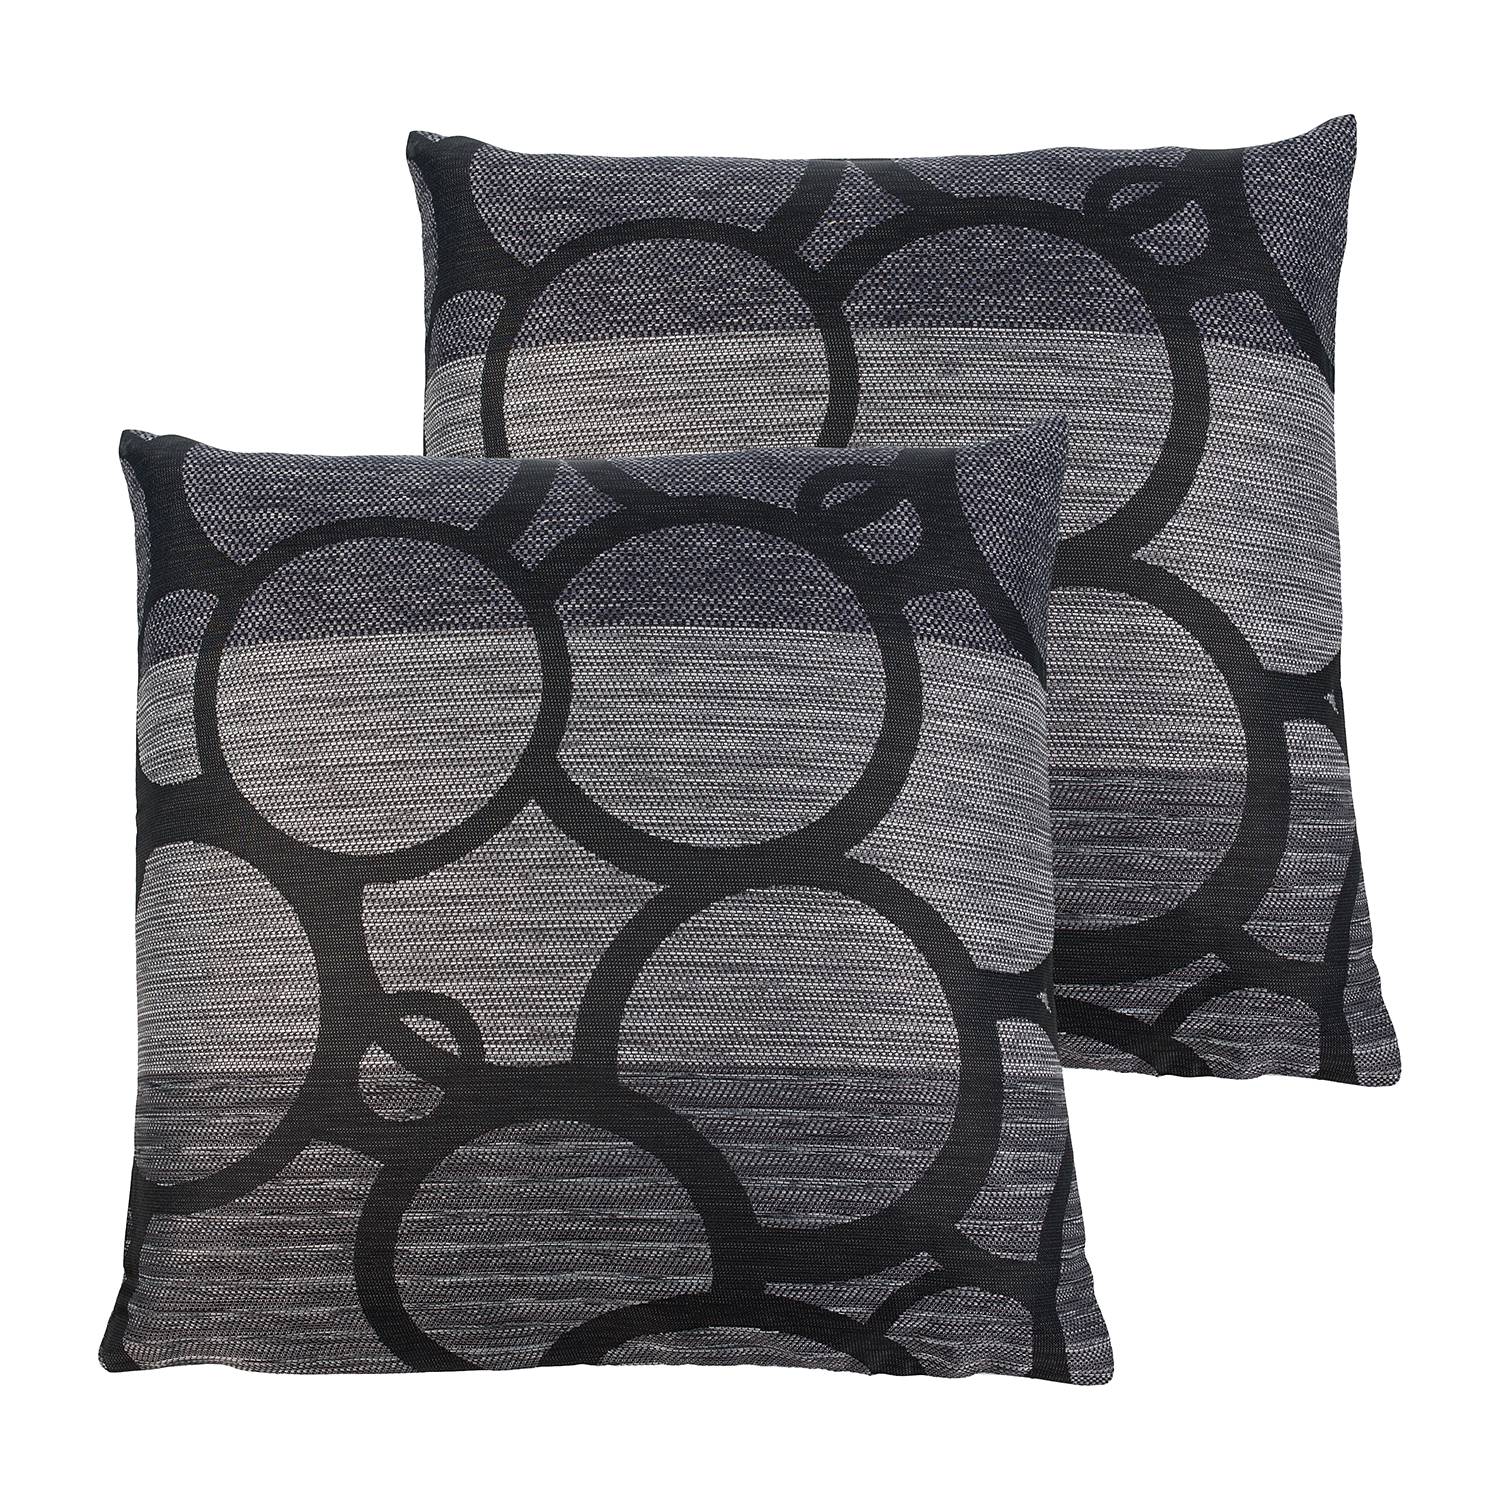 Image of Housses de coussin Conelly 000000001000156141